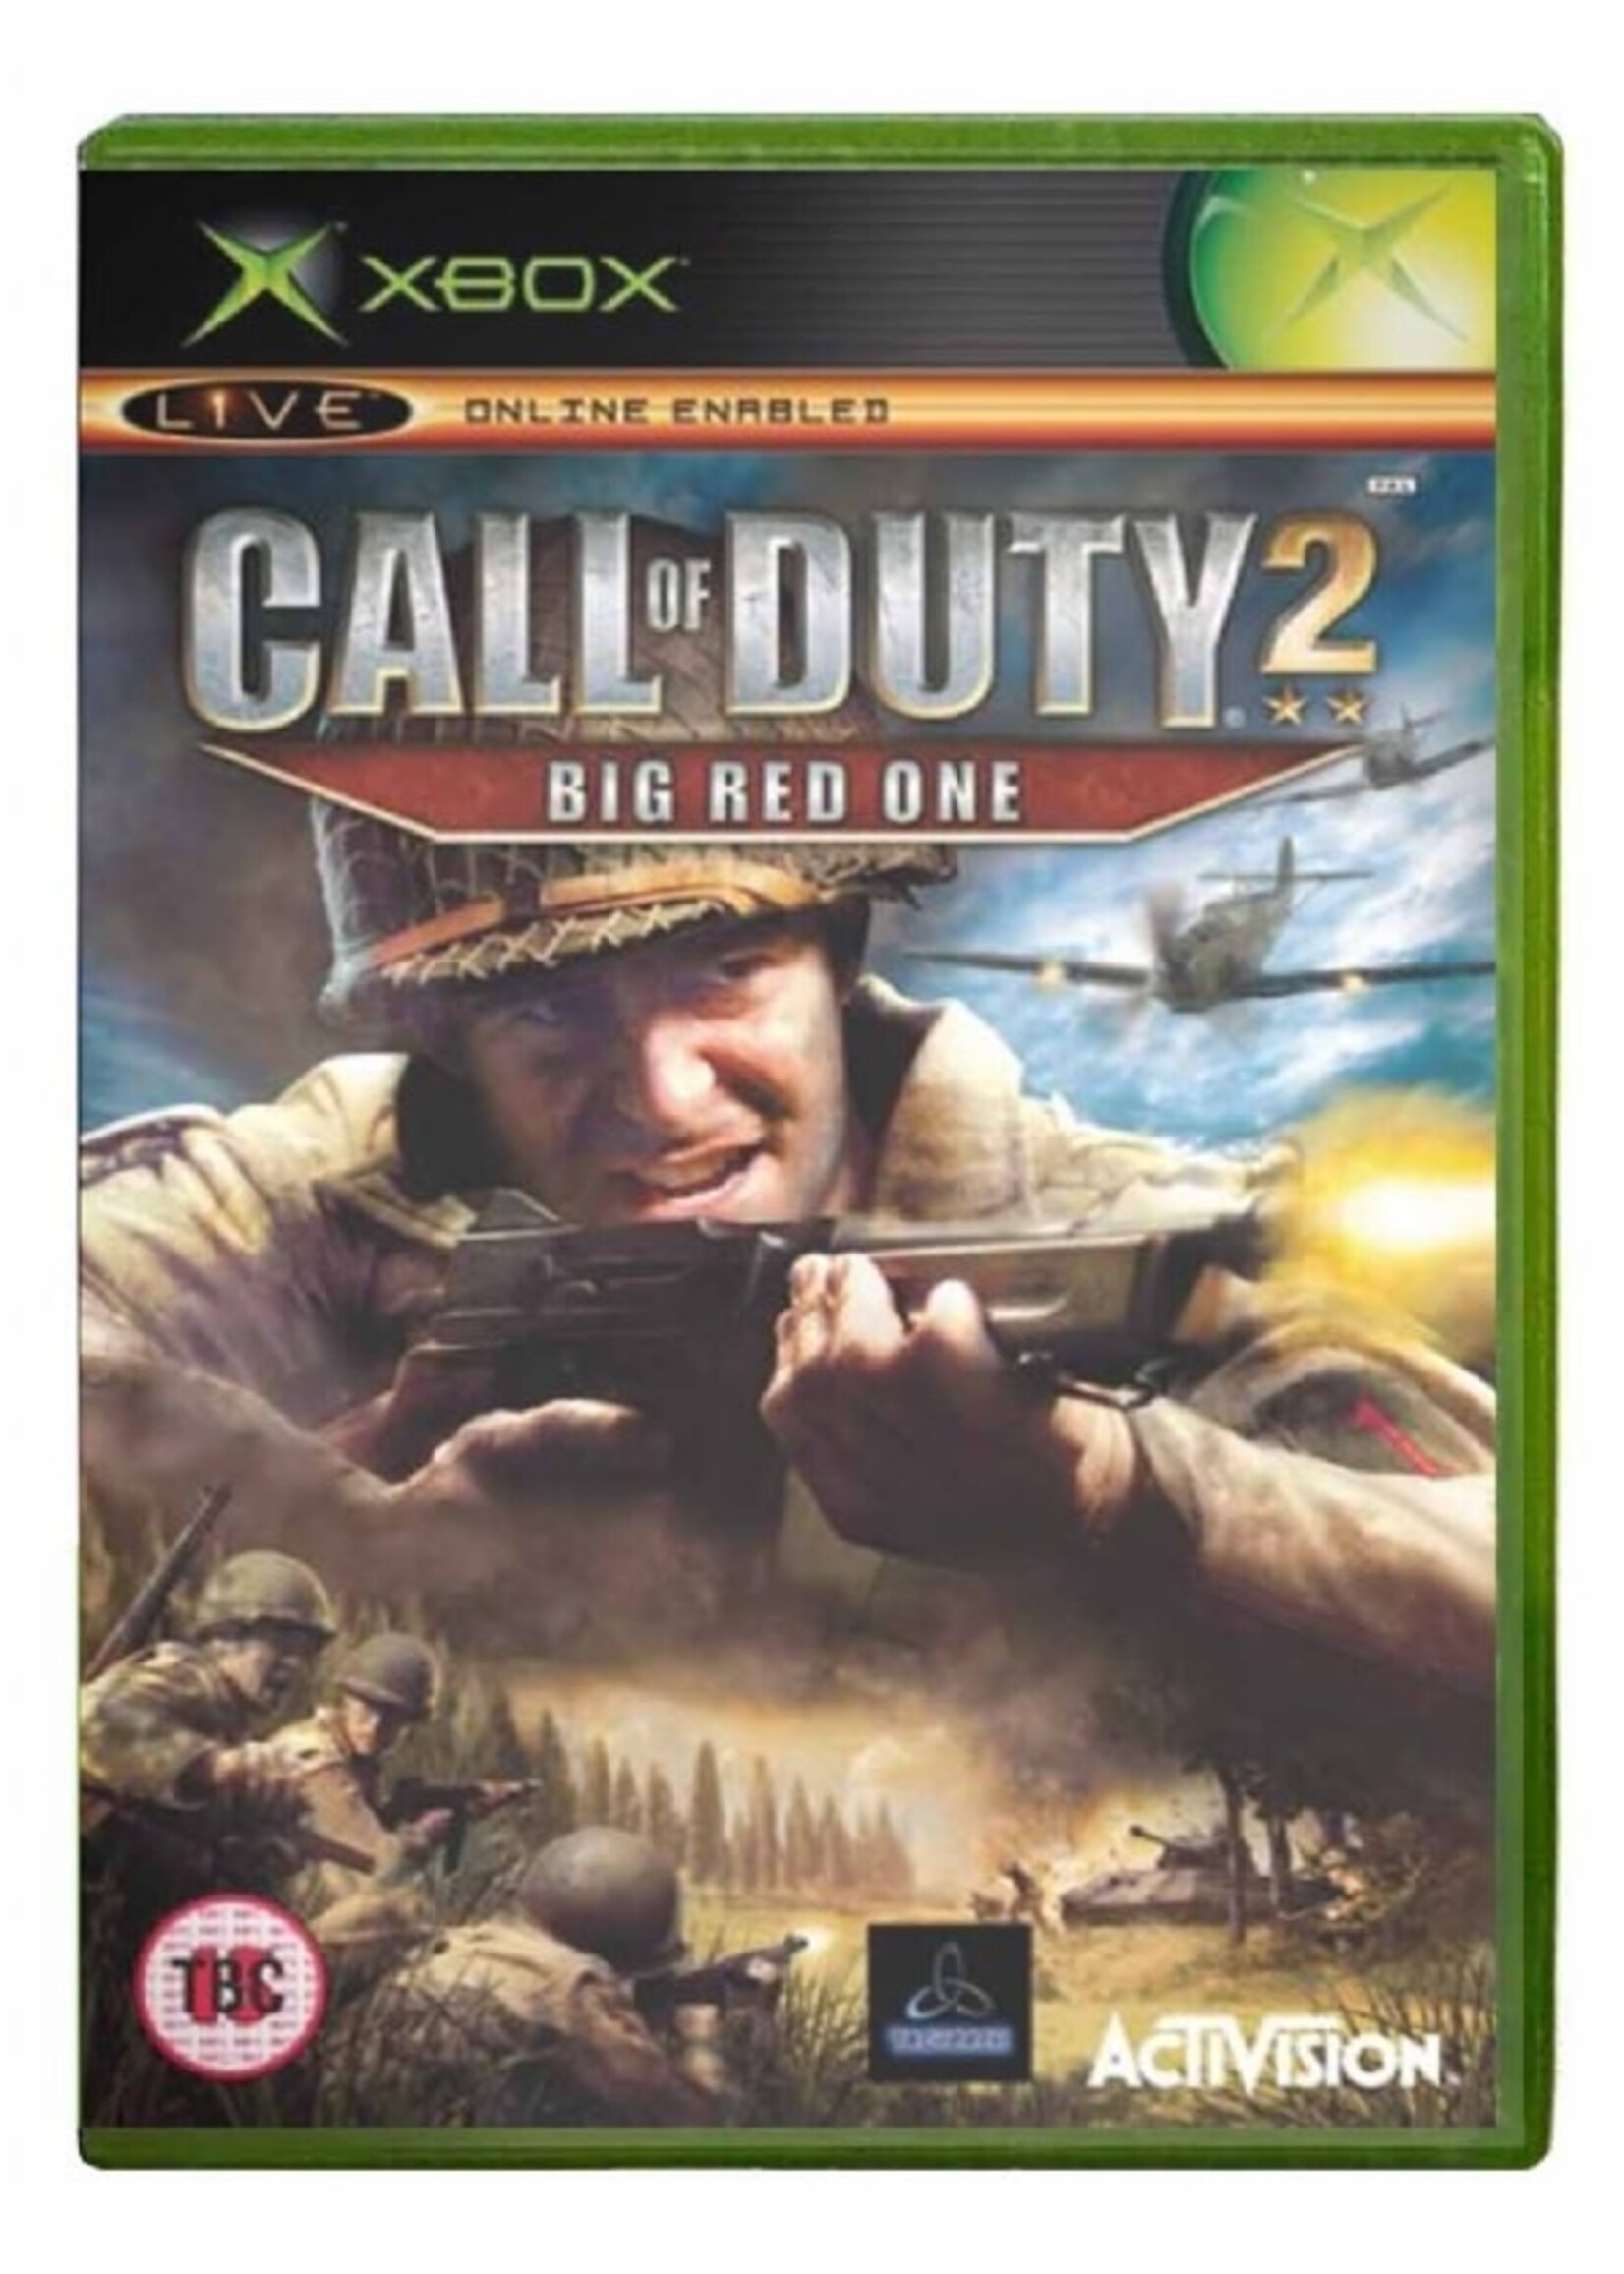 Call of Duty 2: Big Red One - XBOX PrePlayed